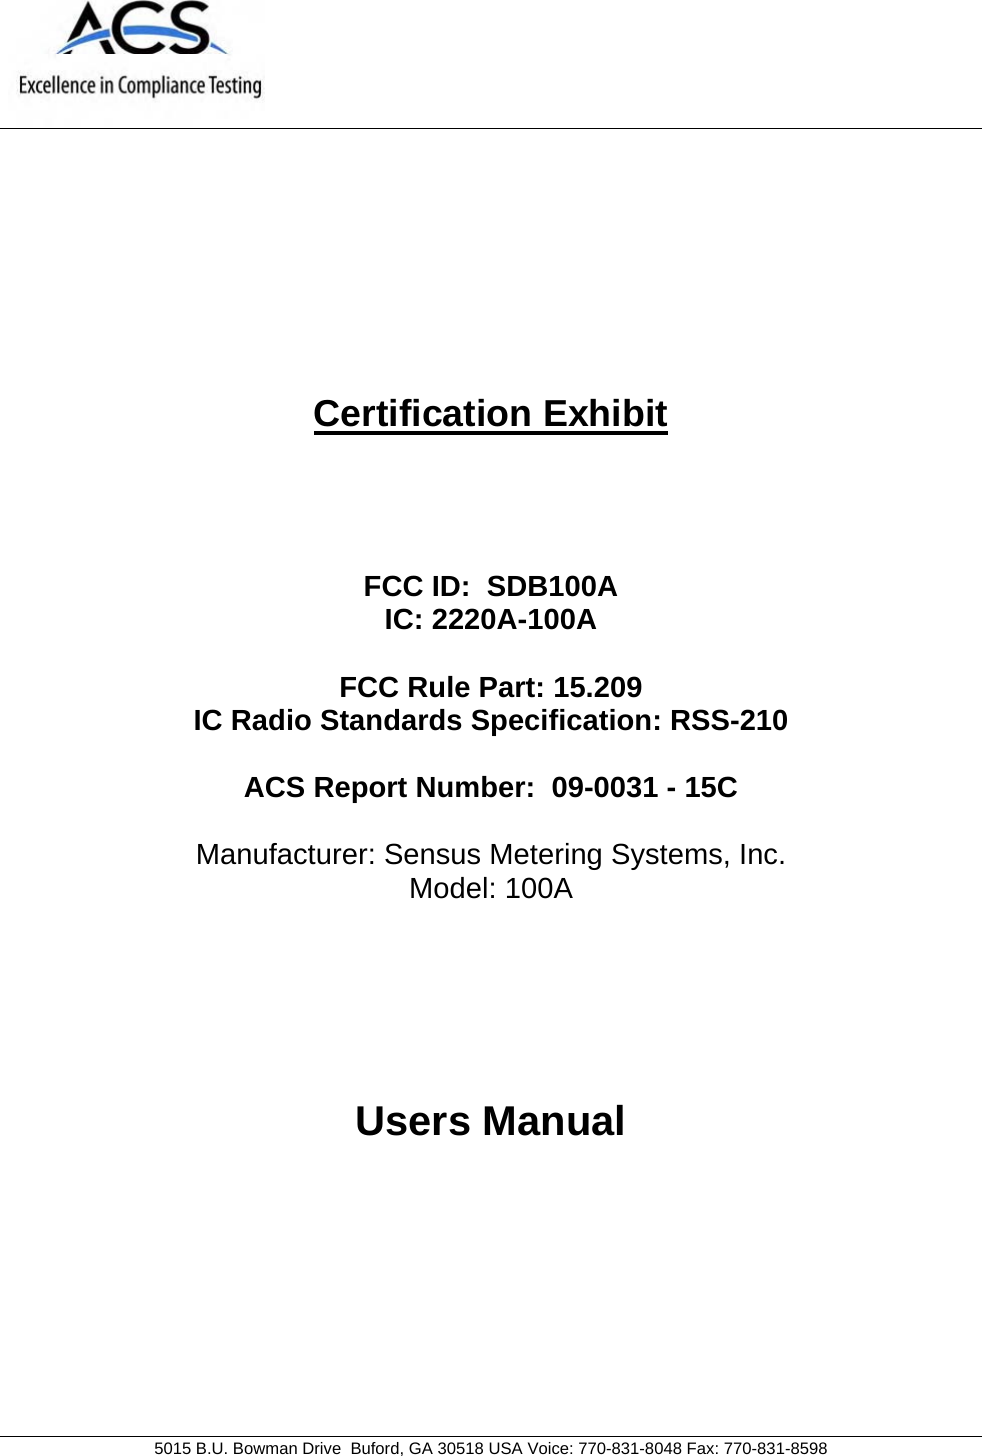     5015 B.U. Bowman Drive  Buford, GA 30518 USA Voice: 770-831-8048 Fax: 770-831-8598   Certification Exhibit     FCC ID:  SDB100A IC: 2220A-100A  FCC Rule Part: 15.209 IC Radio Standards Specification: RSS-210  ACS Report Number:  09-0031 - 15C   Manufacturer: Sensus Metering Systems, Inc. Model: 100A     Users Manual  